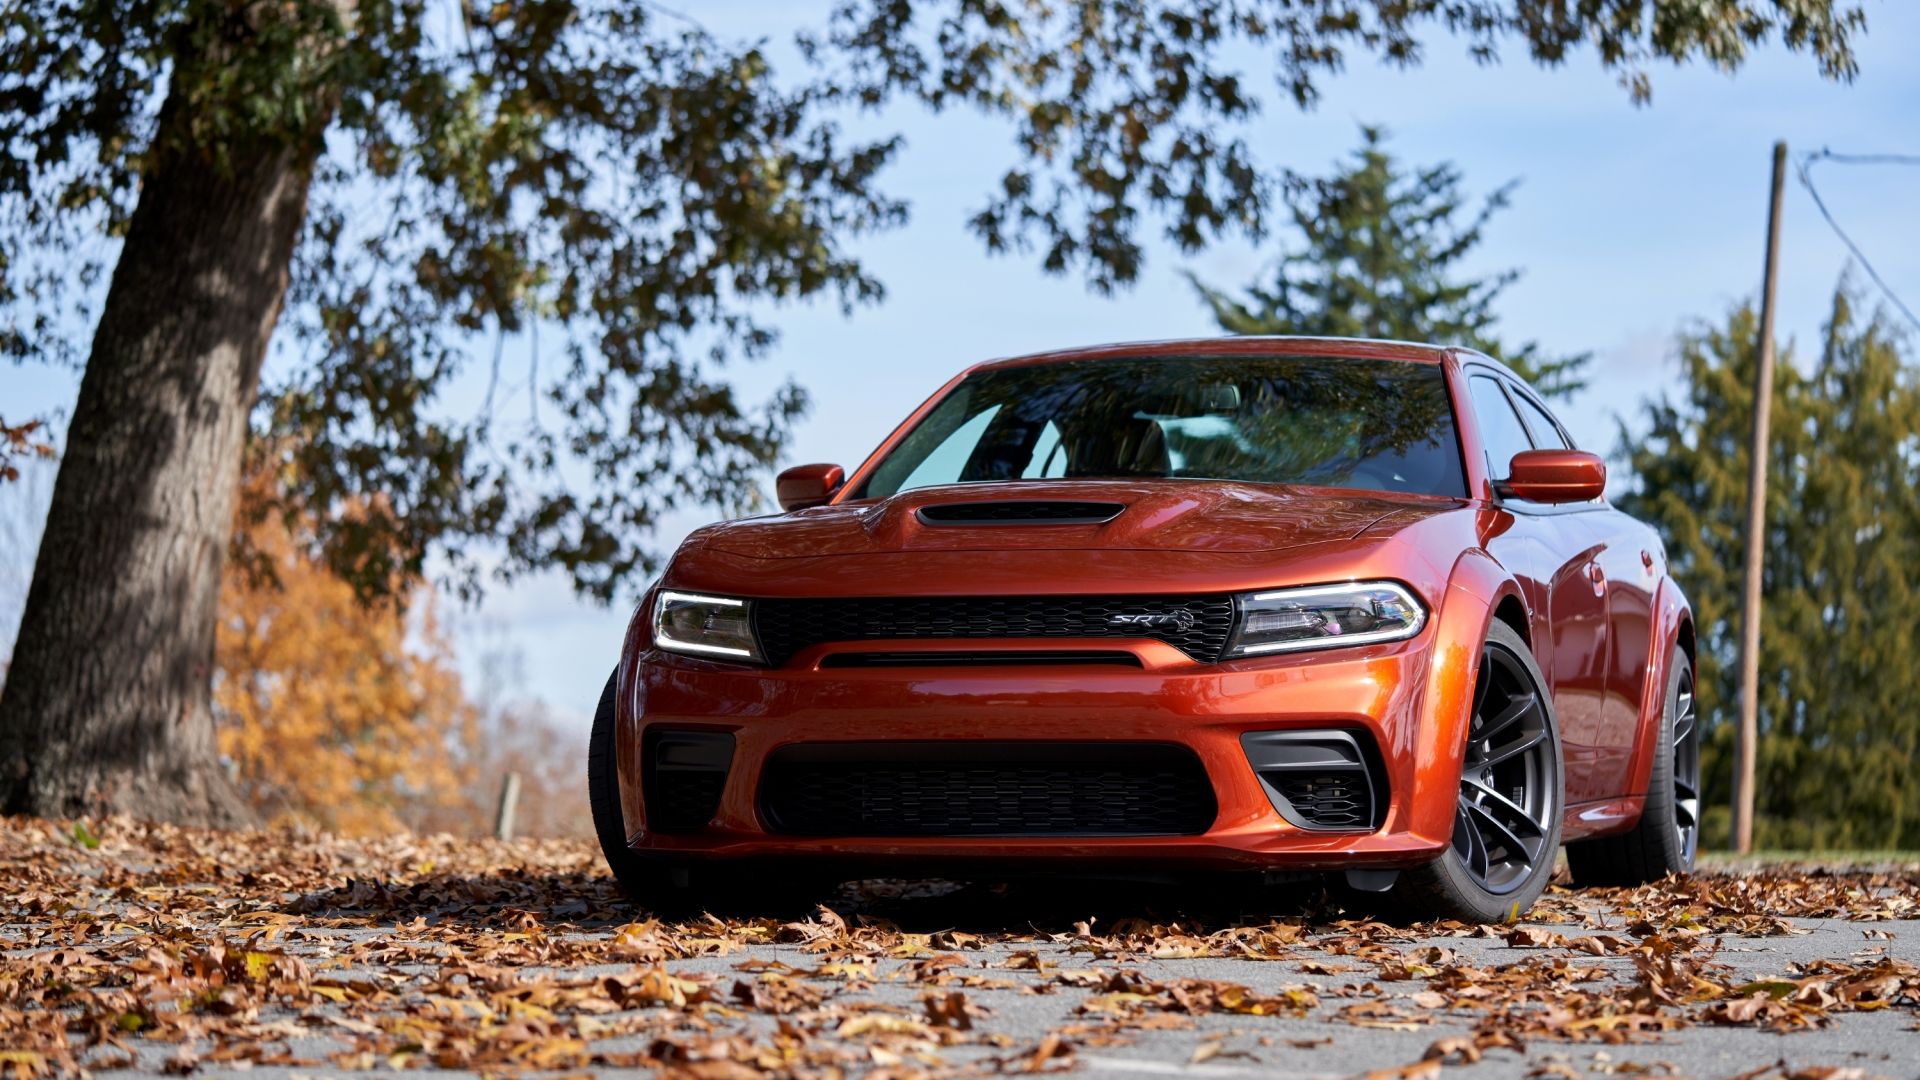 2023 Dodge Charger SRT Hellcat front 3/4 exterior shot parked over dried leaves on the tarmac.